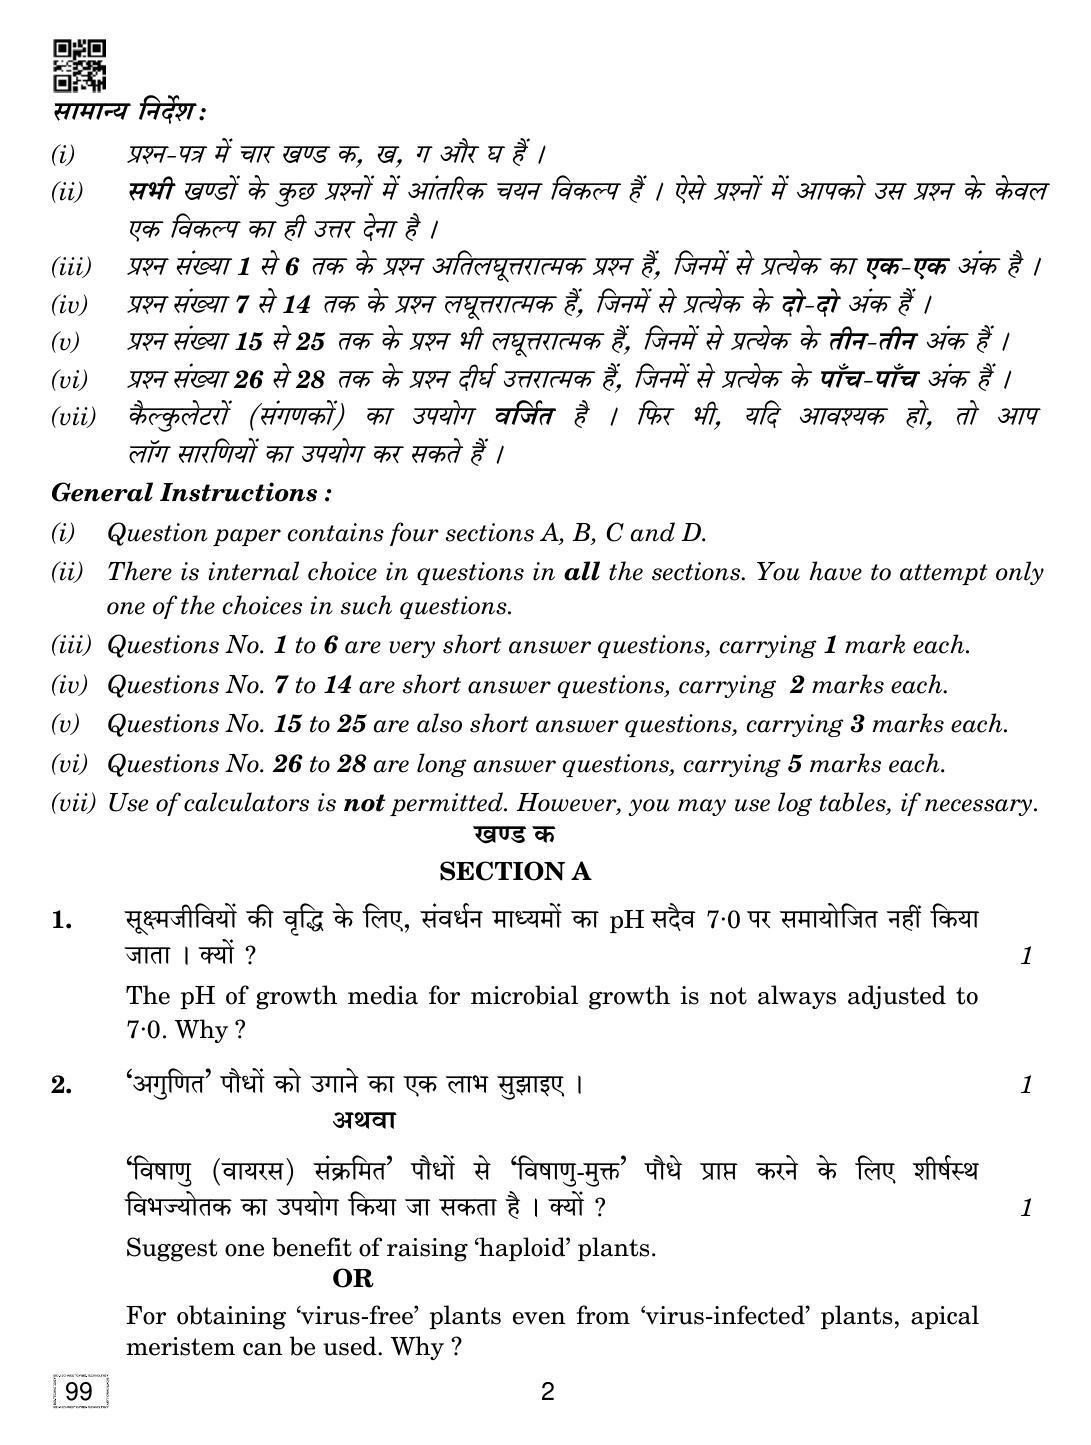 CBSE Class 12 99 BIOTECHNOLOGY 2019 Compartment Question Paper - Page 2